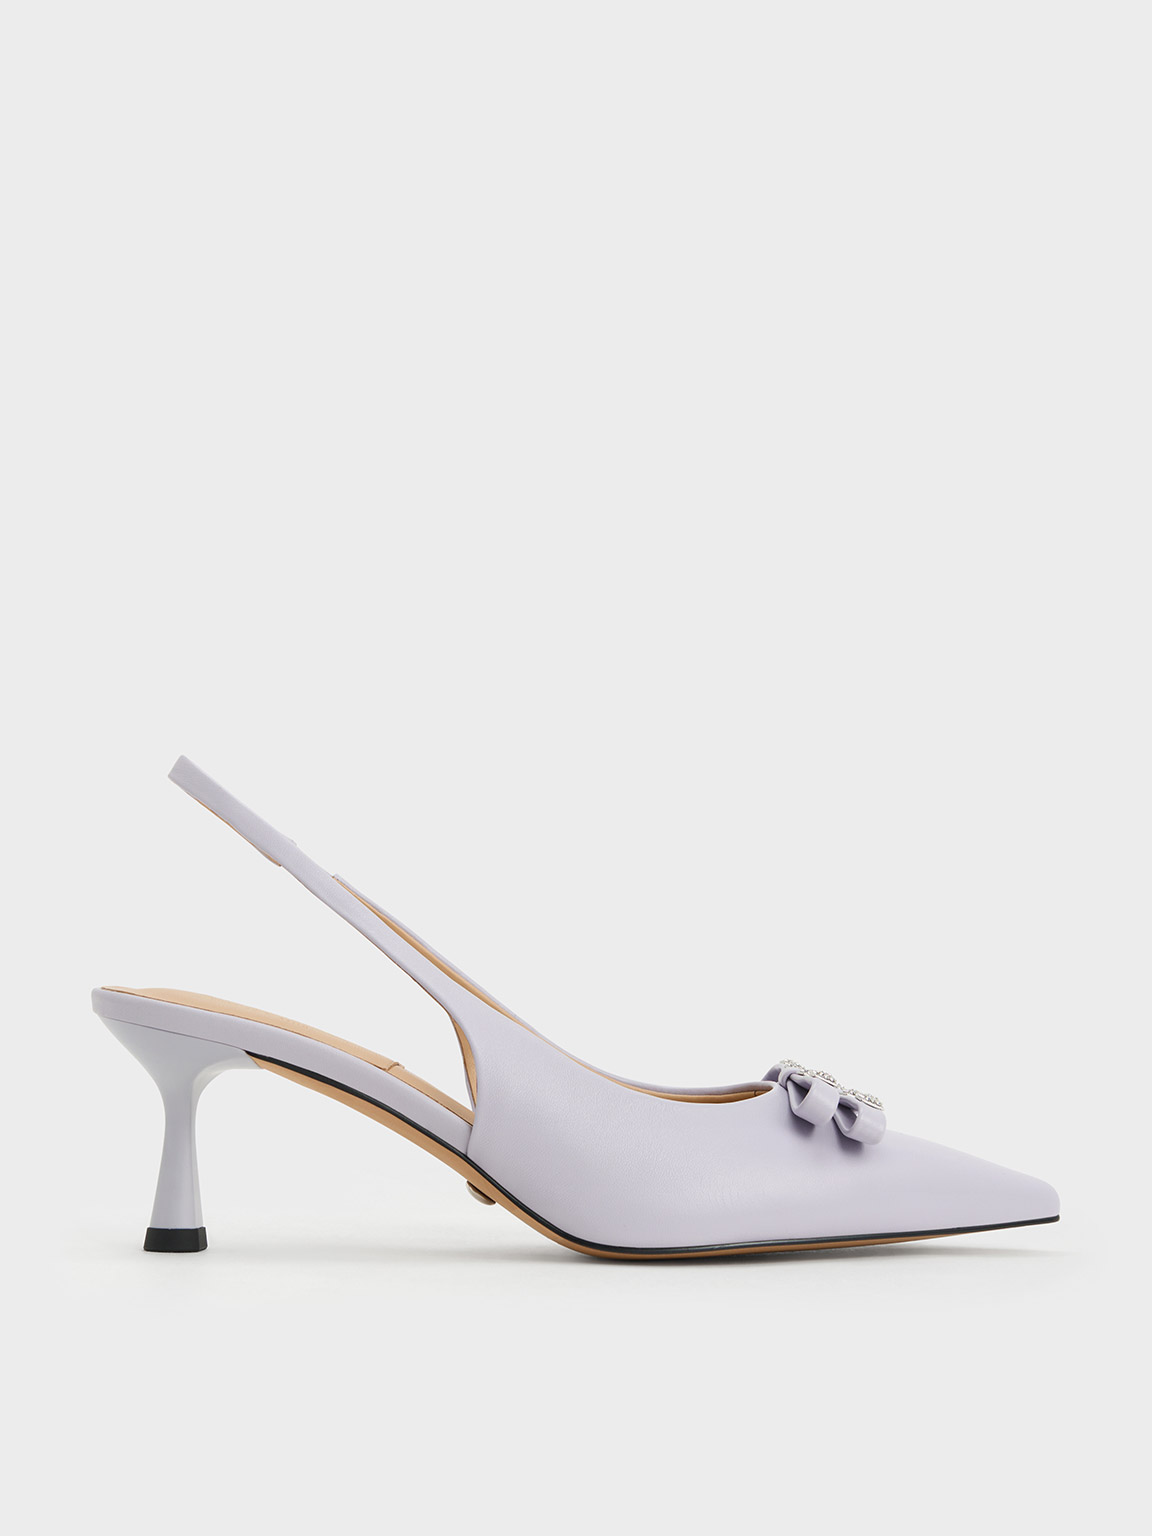 Lilac Bow Crystal-Embellished Leather Slingback Pumps - CHARLES & KEITH US